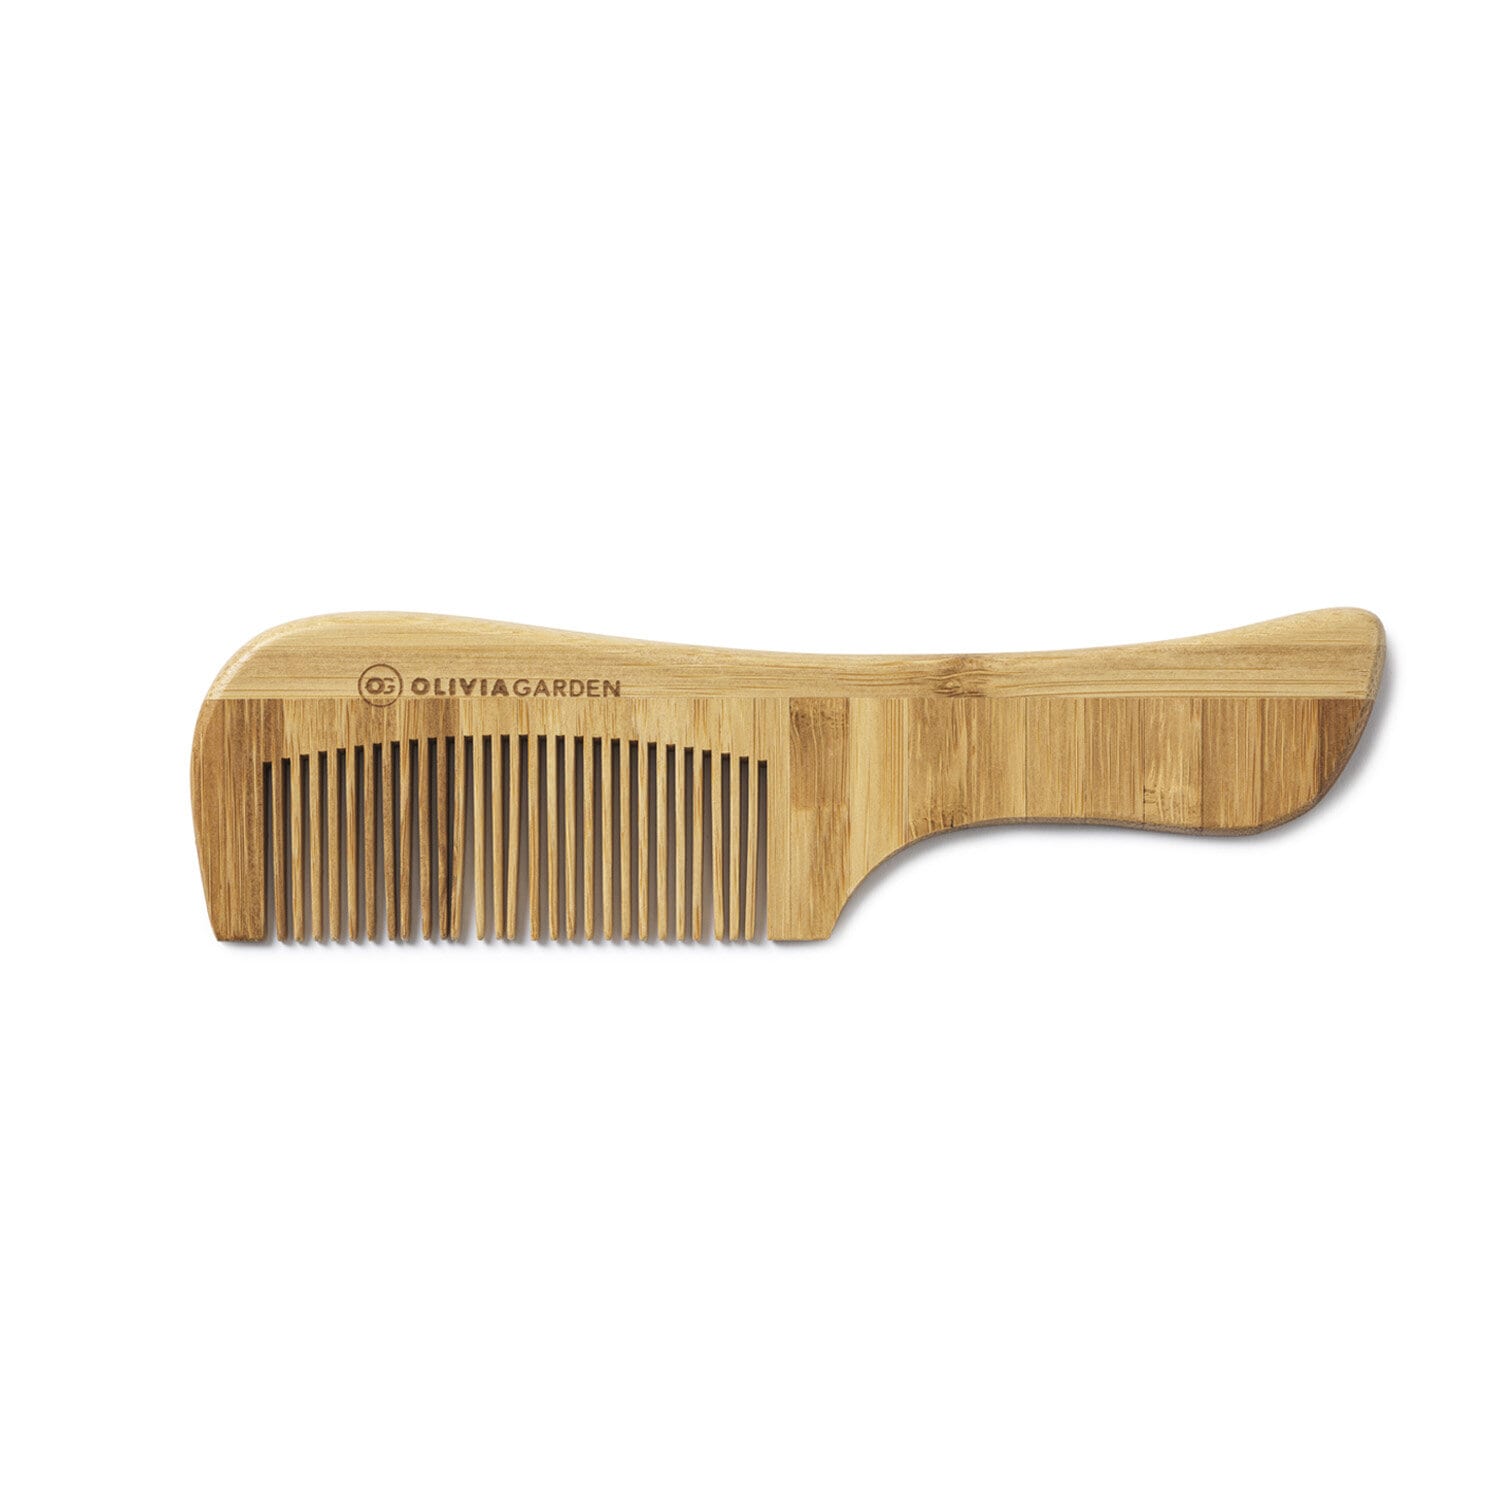 Bamboo Touch Comb 2 fintandad kam med handtag